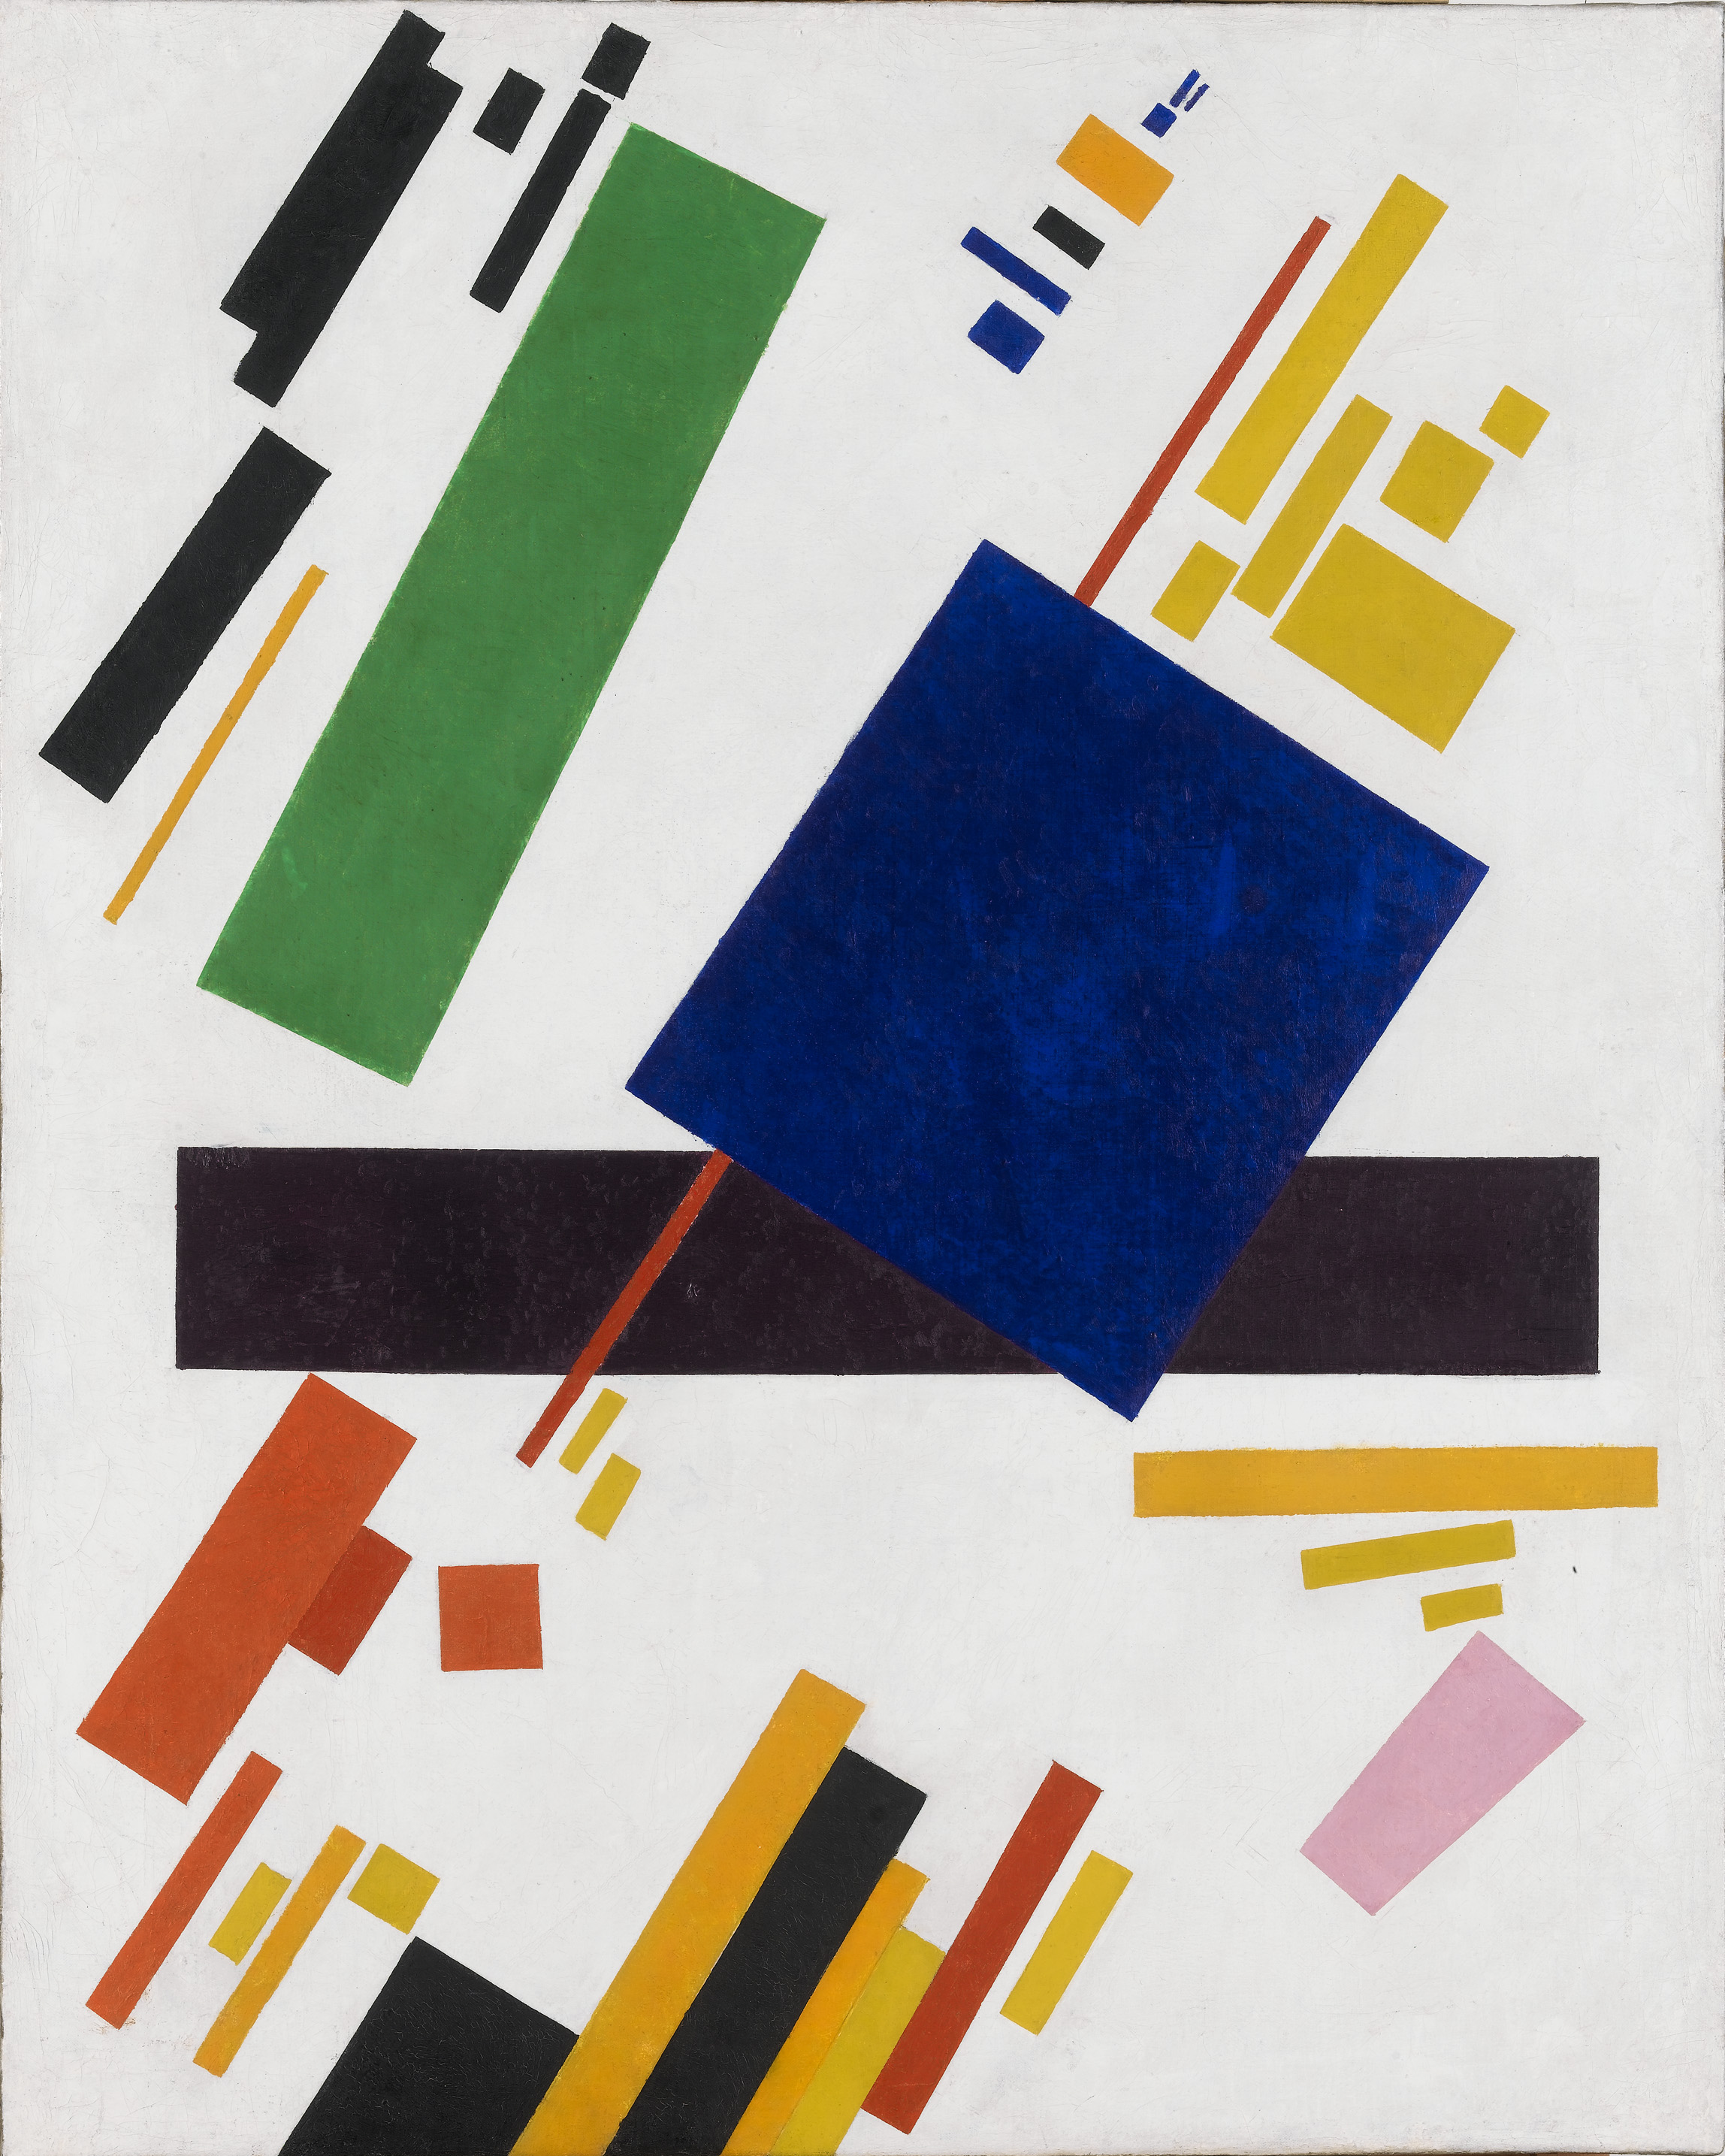 Suprematist Composition by Kazimir Malevich - 1916 - 88.5 x 71 cm private collection